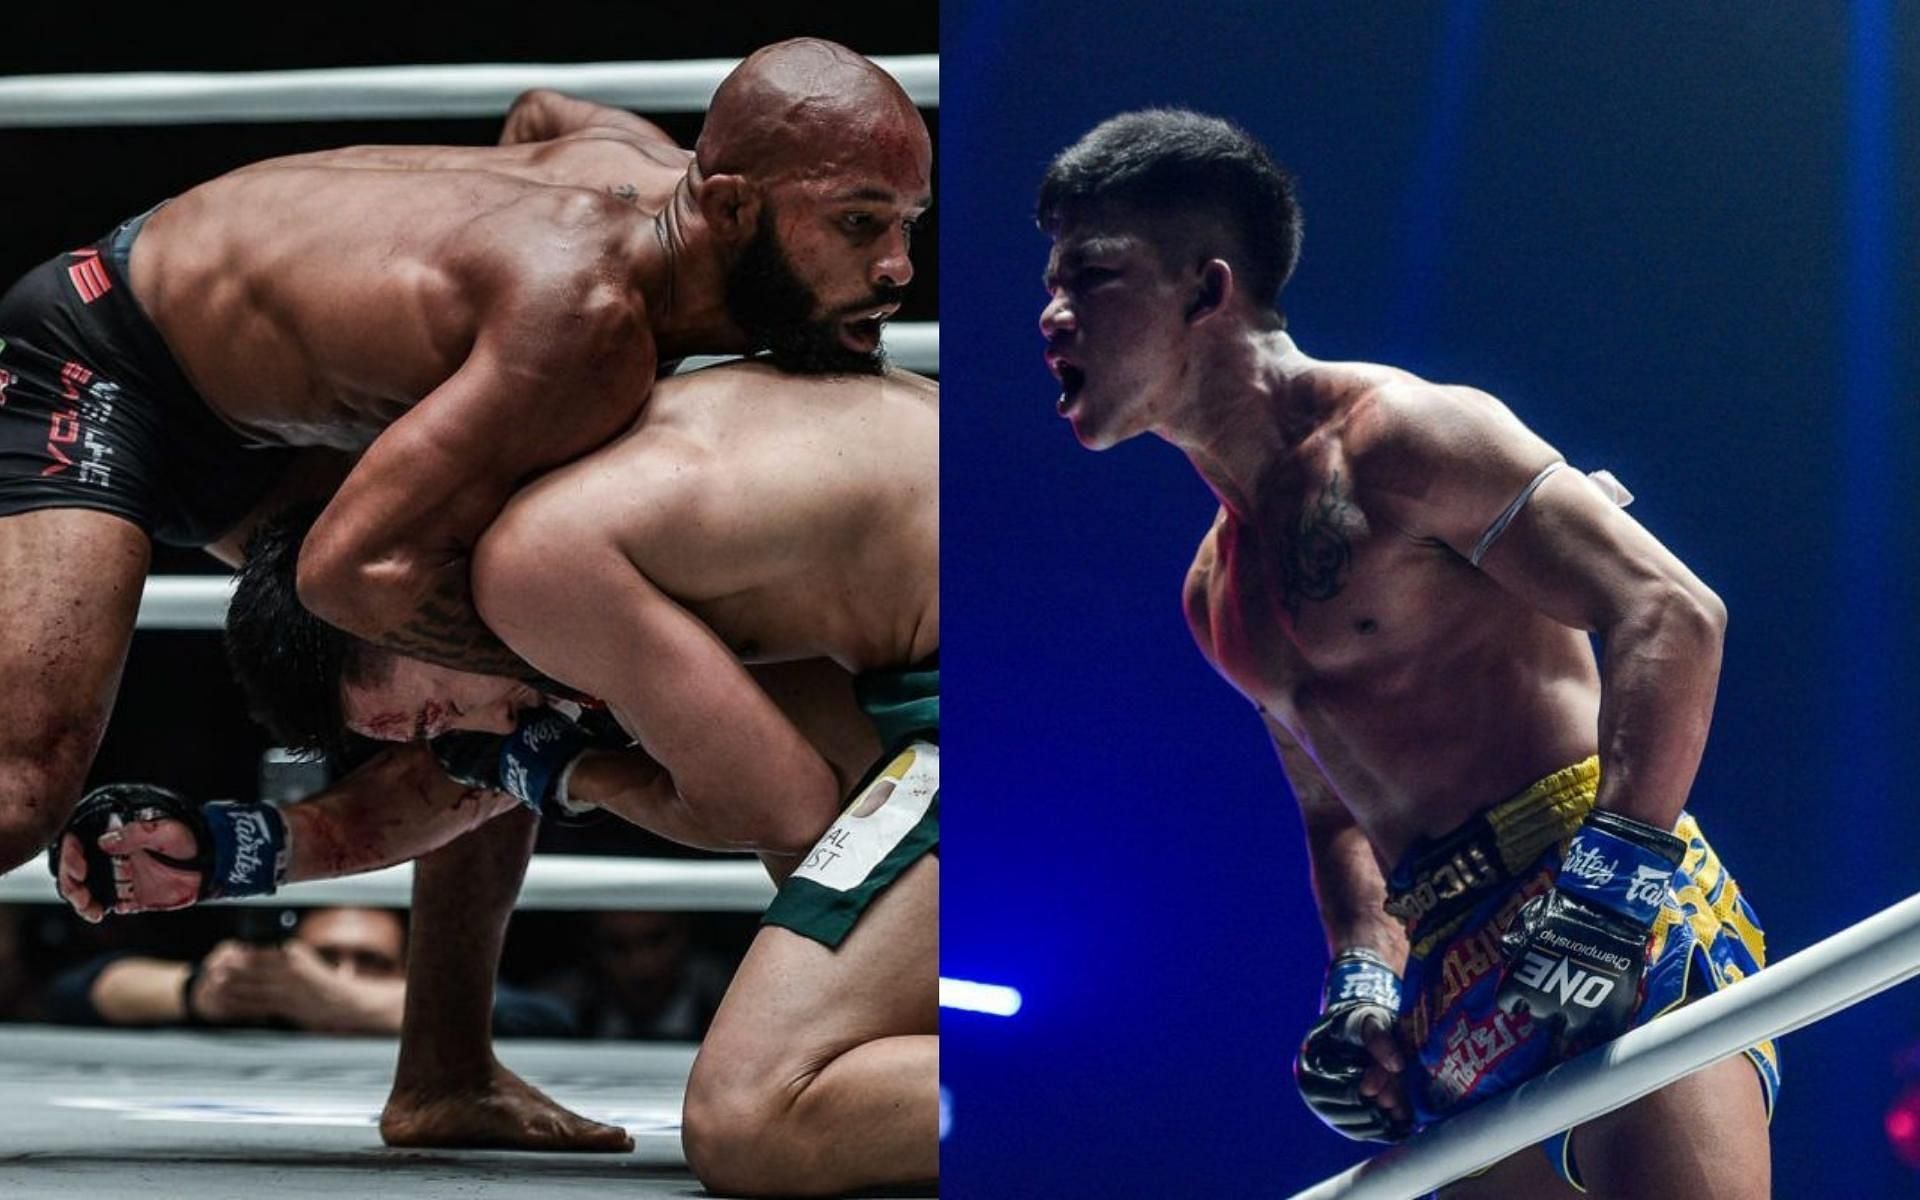 Demetrious Johnson (left) will face Rodtang Jitmuangnon (right) in a mixed rules bout at ONE X. (Image courtesy of ONE Championship)